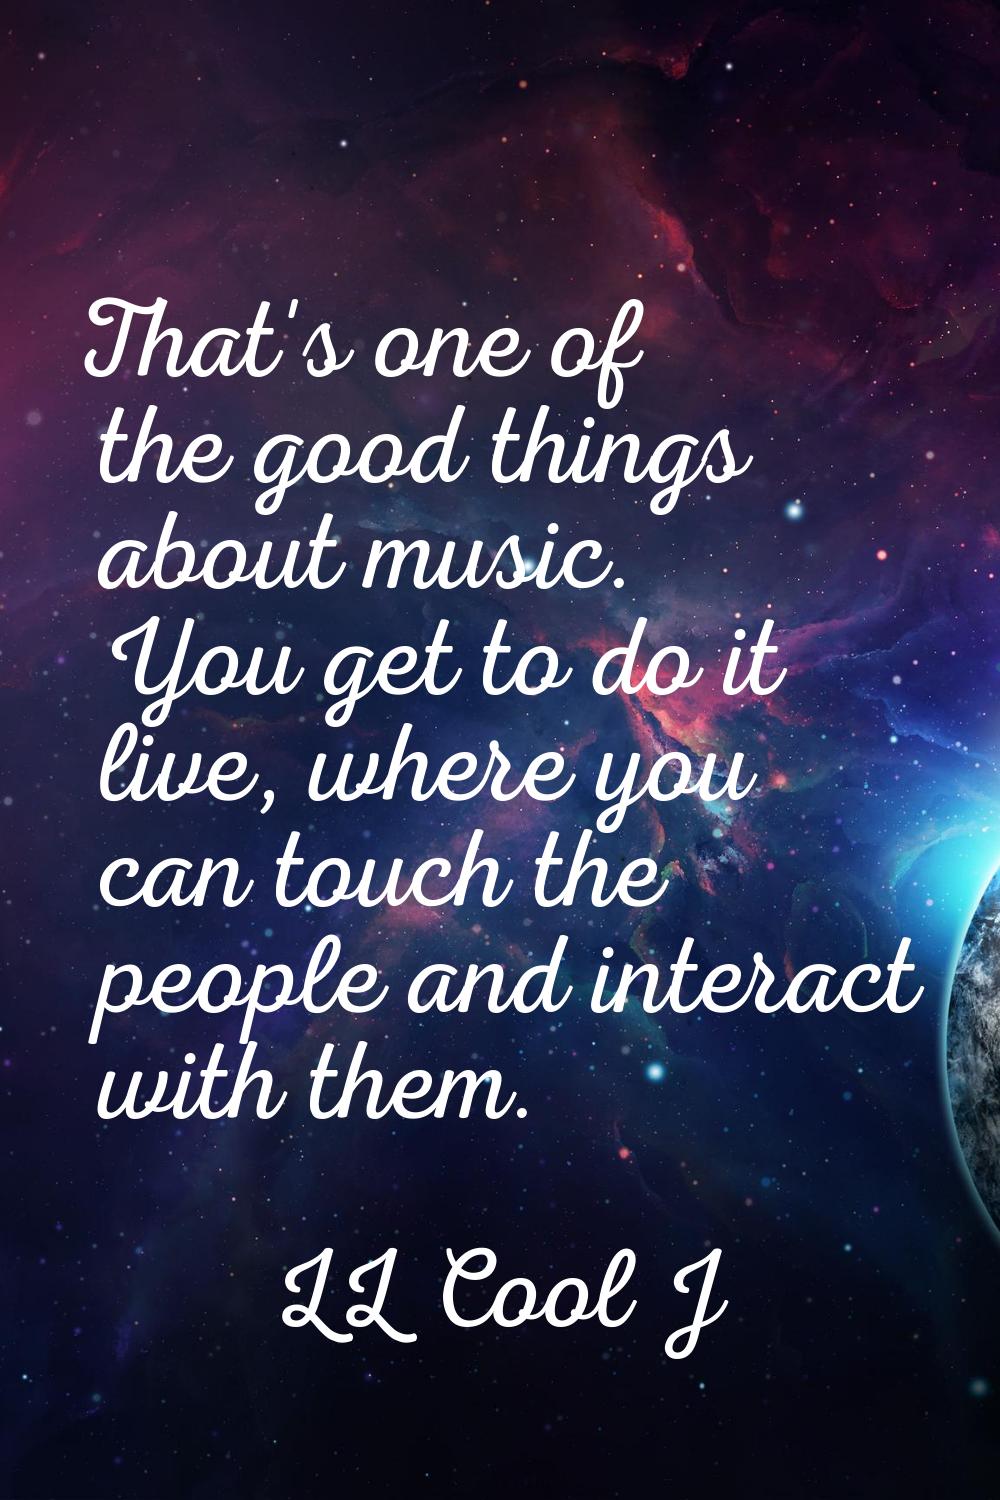 That's one of the good things about music. You get to do it live, where you can touch the people an